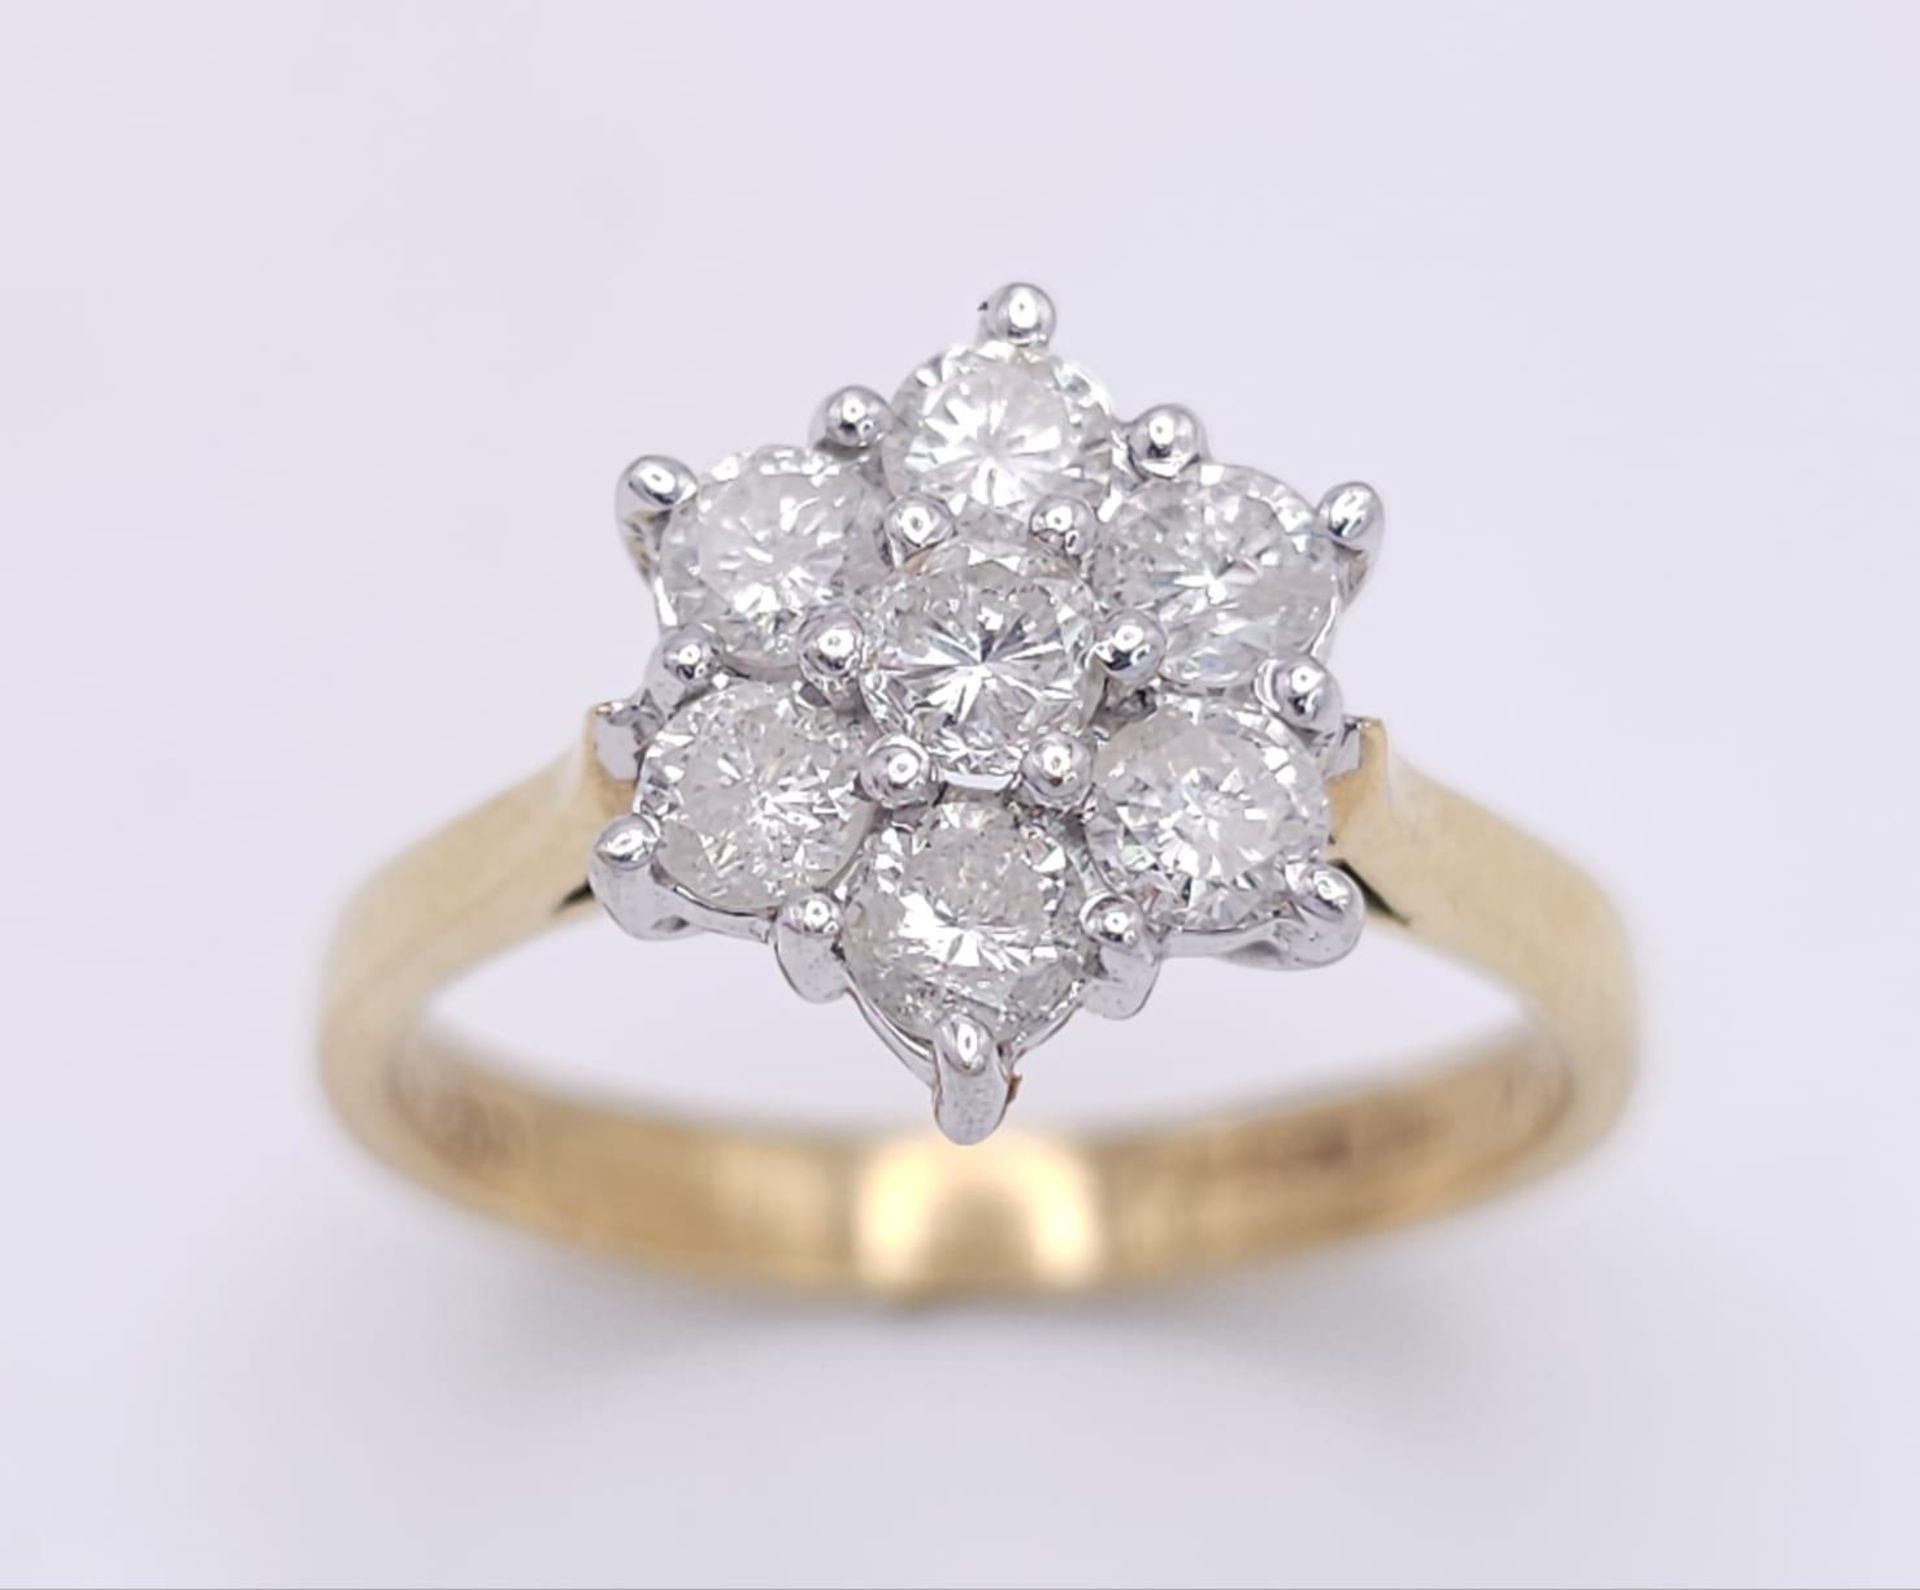 18K YELLOW GOLD DIAMOND CLUSTER RING WITH APPROX 1.05CT DIAMONDS IN FLORAL DESIGN, WEIGHT 4.6G - Image 2 of 7